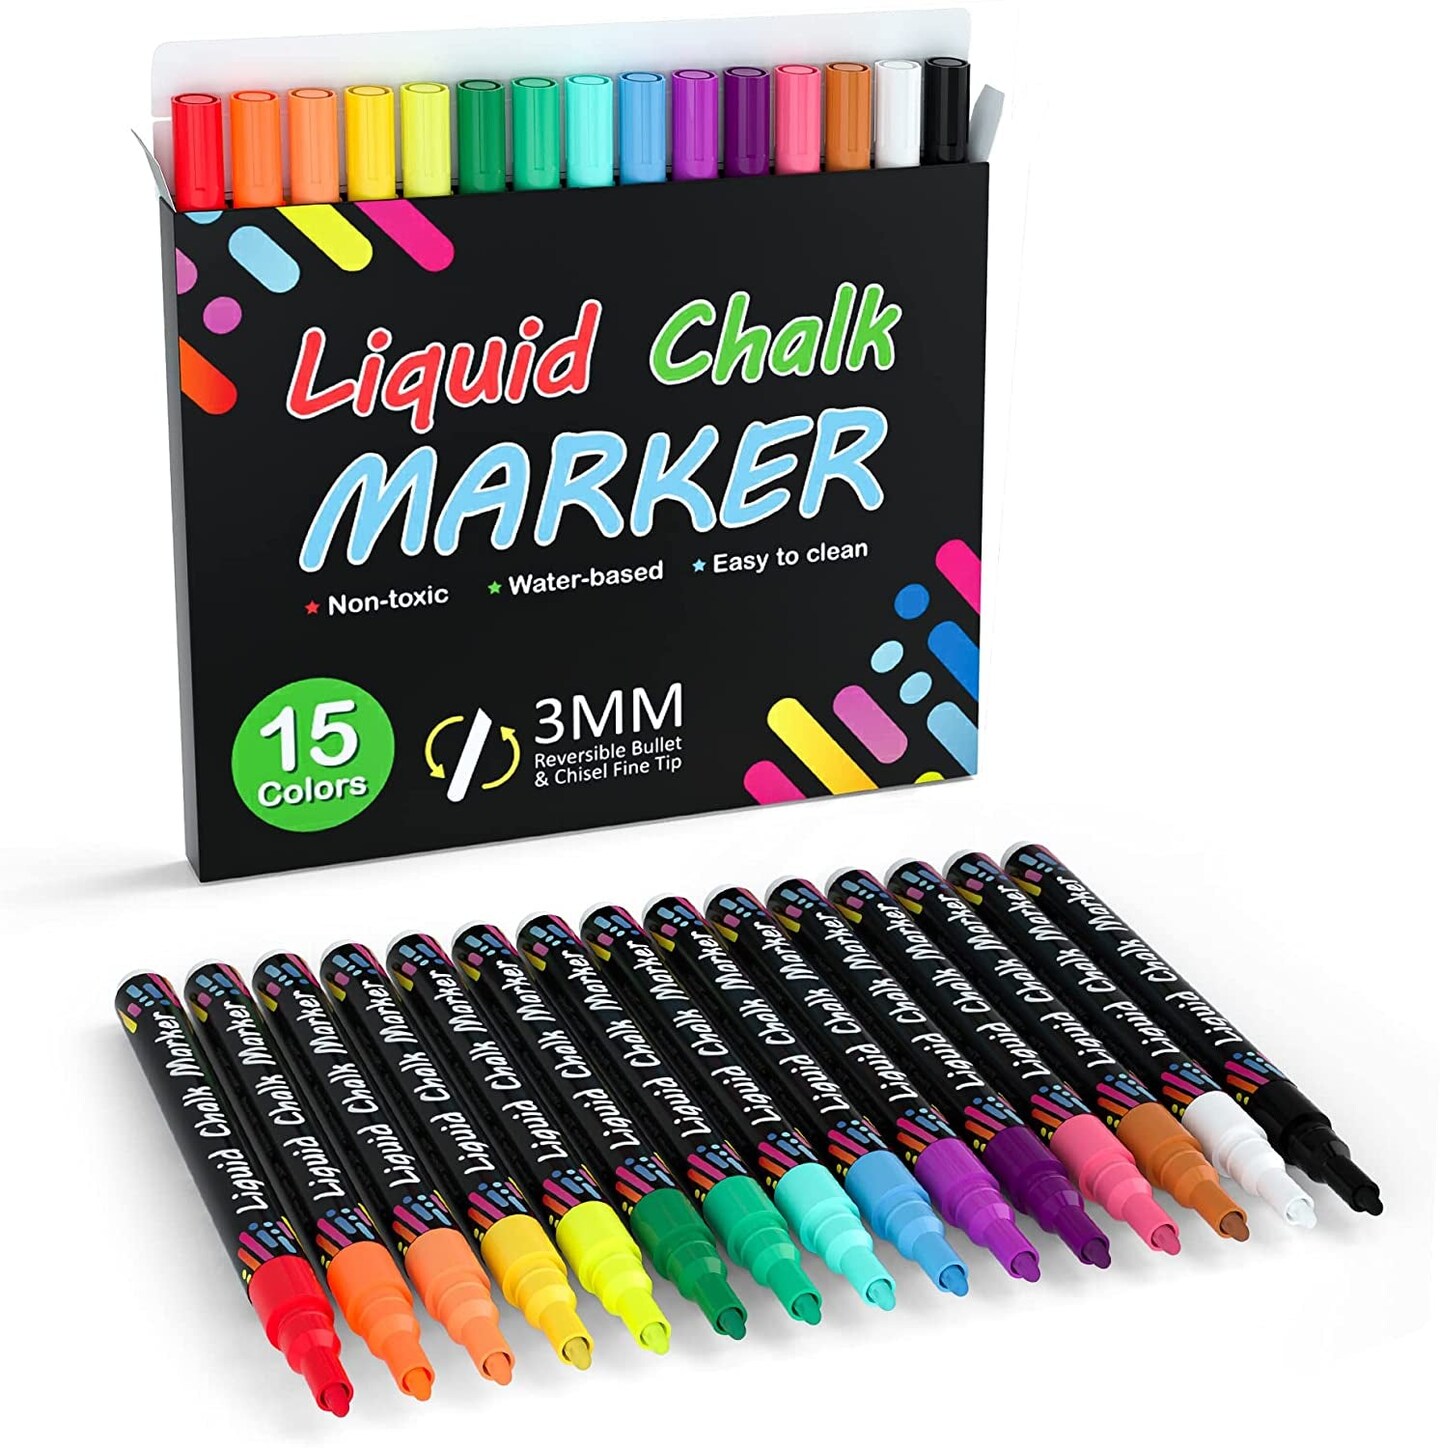 How to Draw and Write on Windows With Liquid Chalk Markers - FeltMagnet